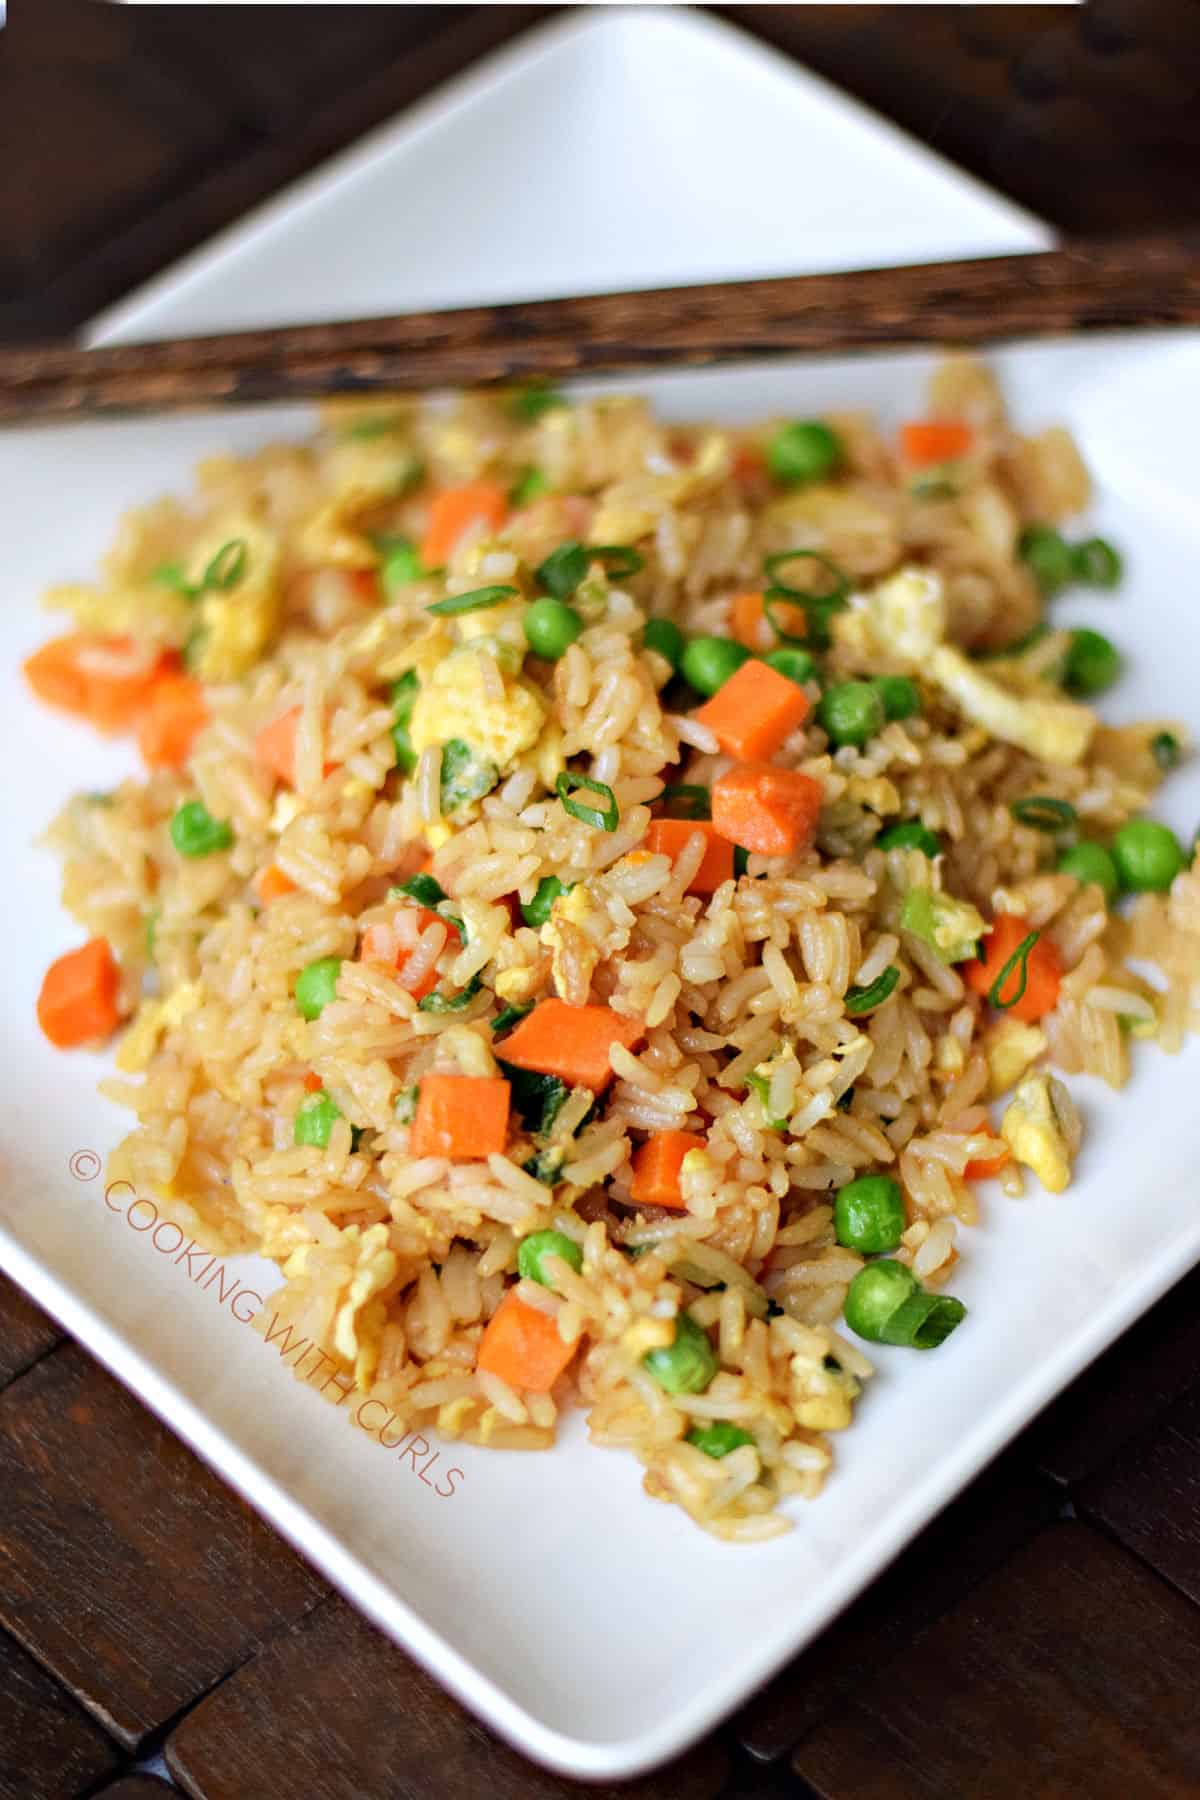 Rice mixed with soy sauce, scrambled eggs, peas, carrots, and green onions on a square plate.